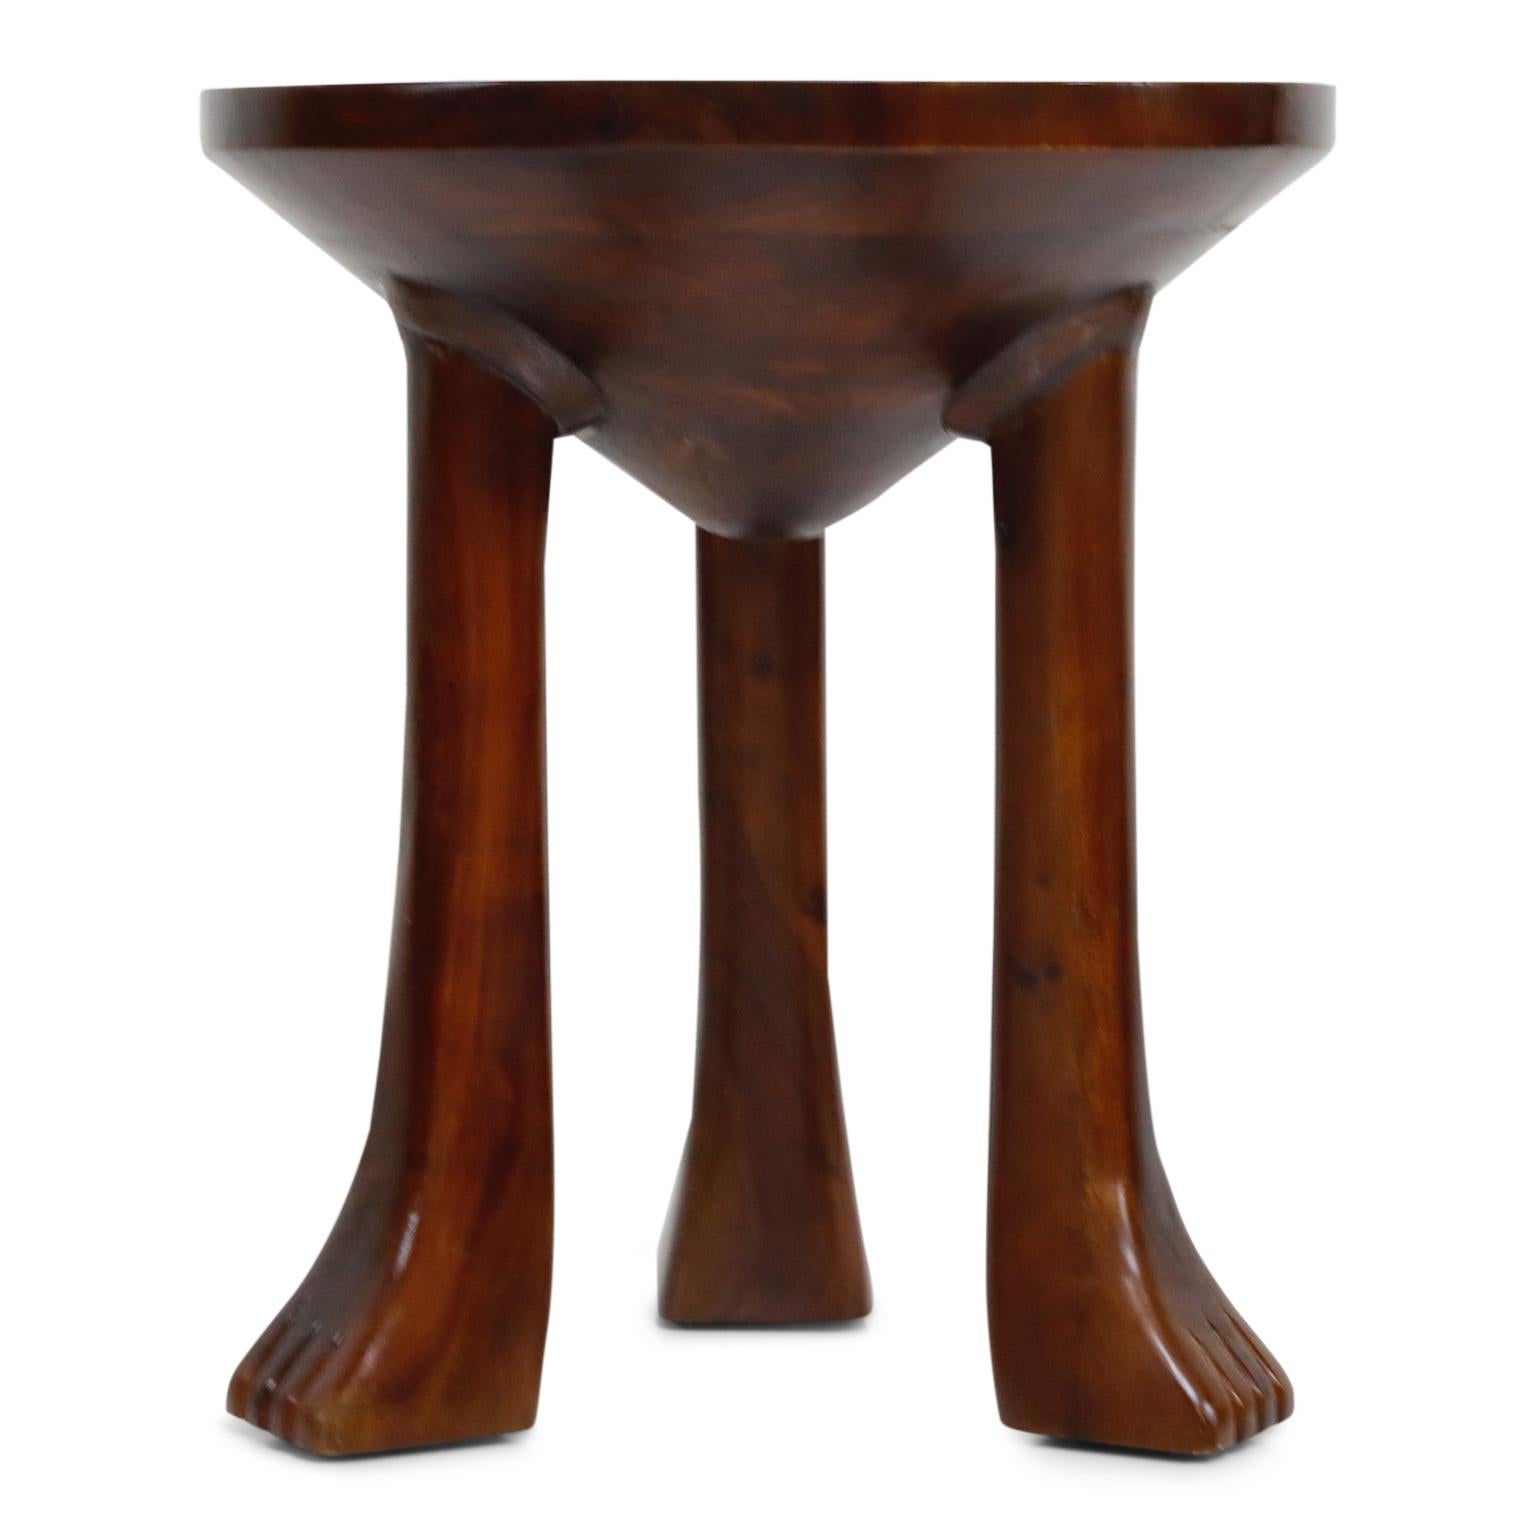 These attractive three-legged carved teak side tables are in the style of John Dickinson's 